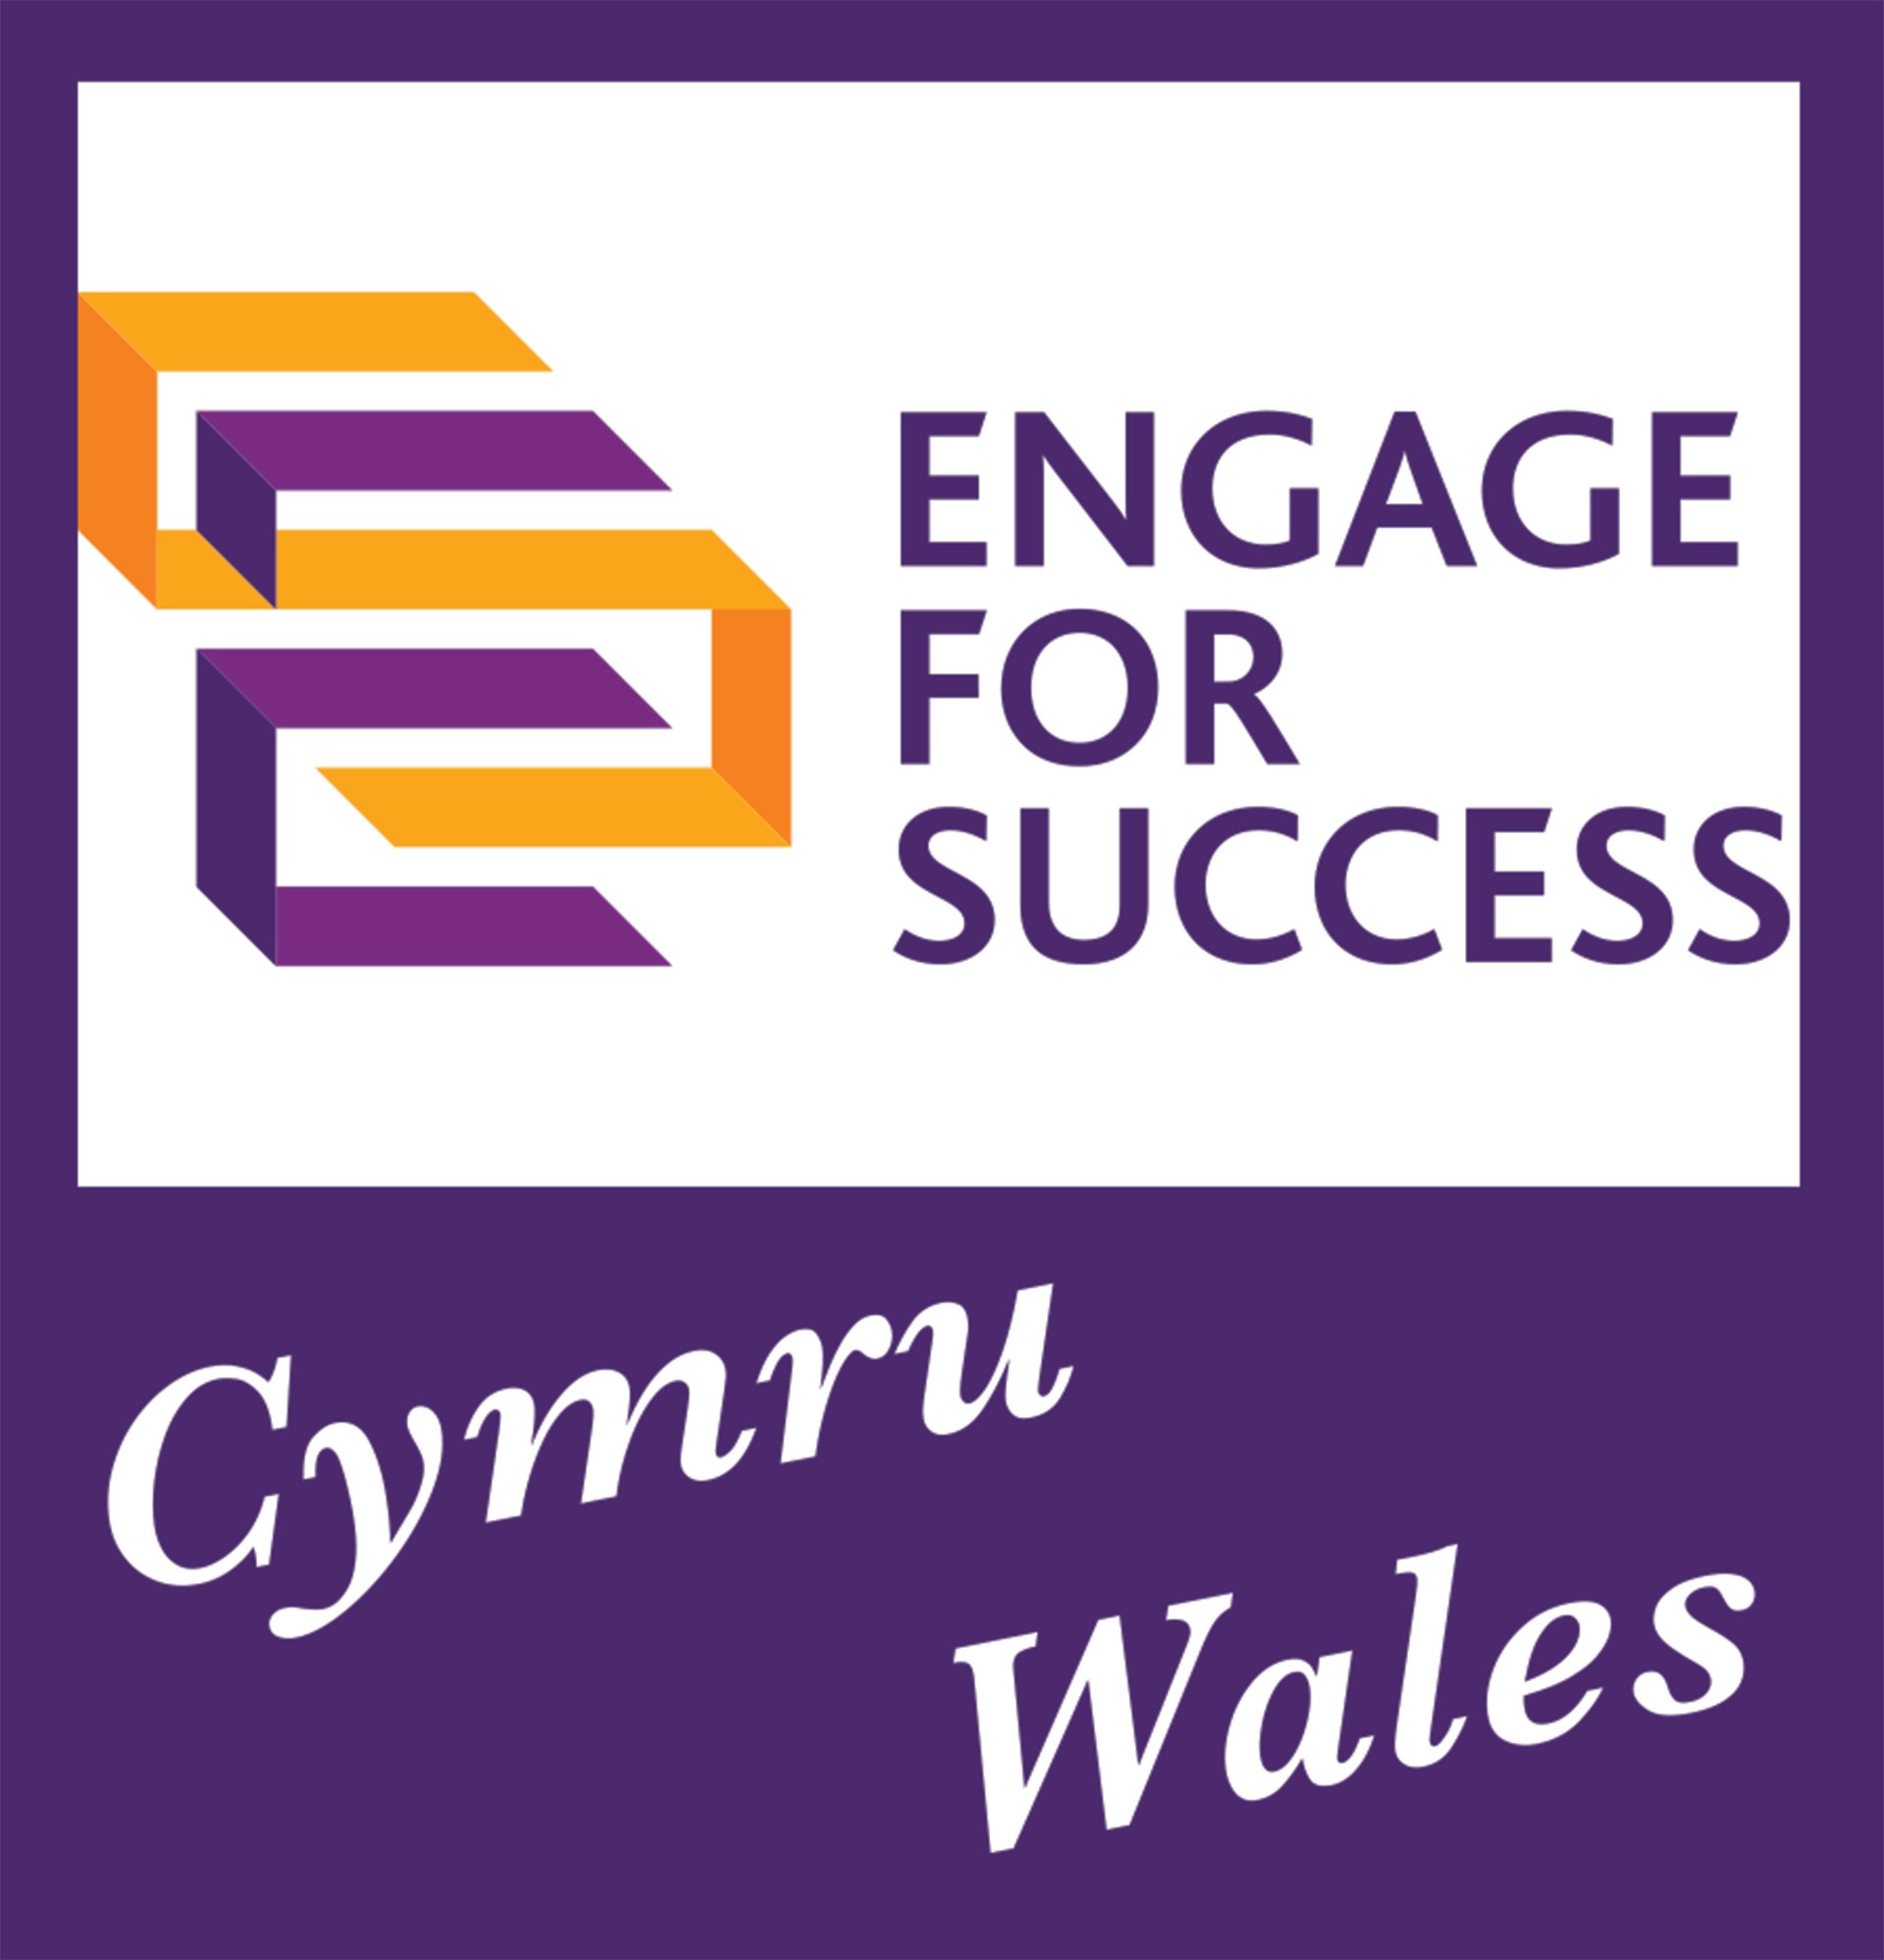 Our aim is to build on and grow a thriving Engage For Success Community of like-minded individuals and organisations within Wales. #EFSwales #EmployeeEngagement